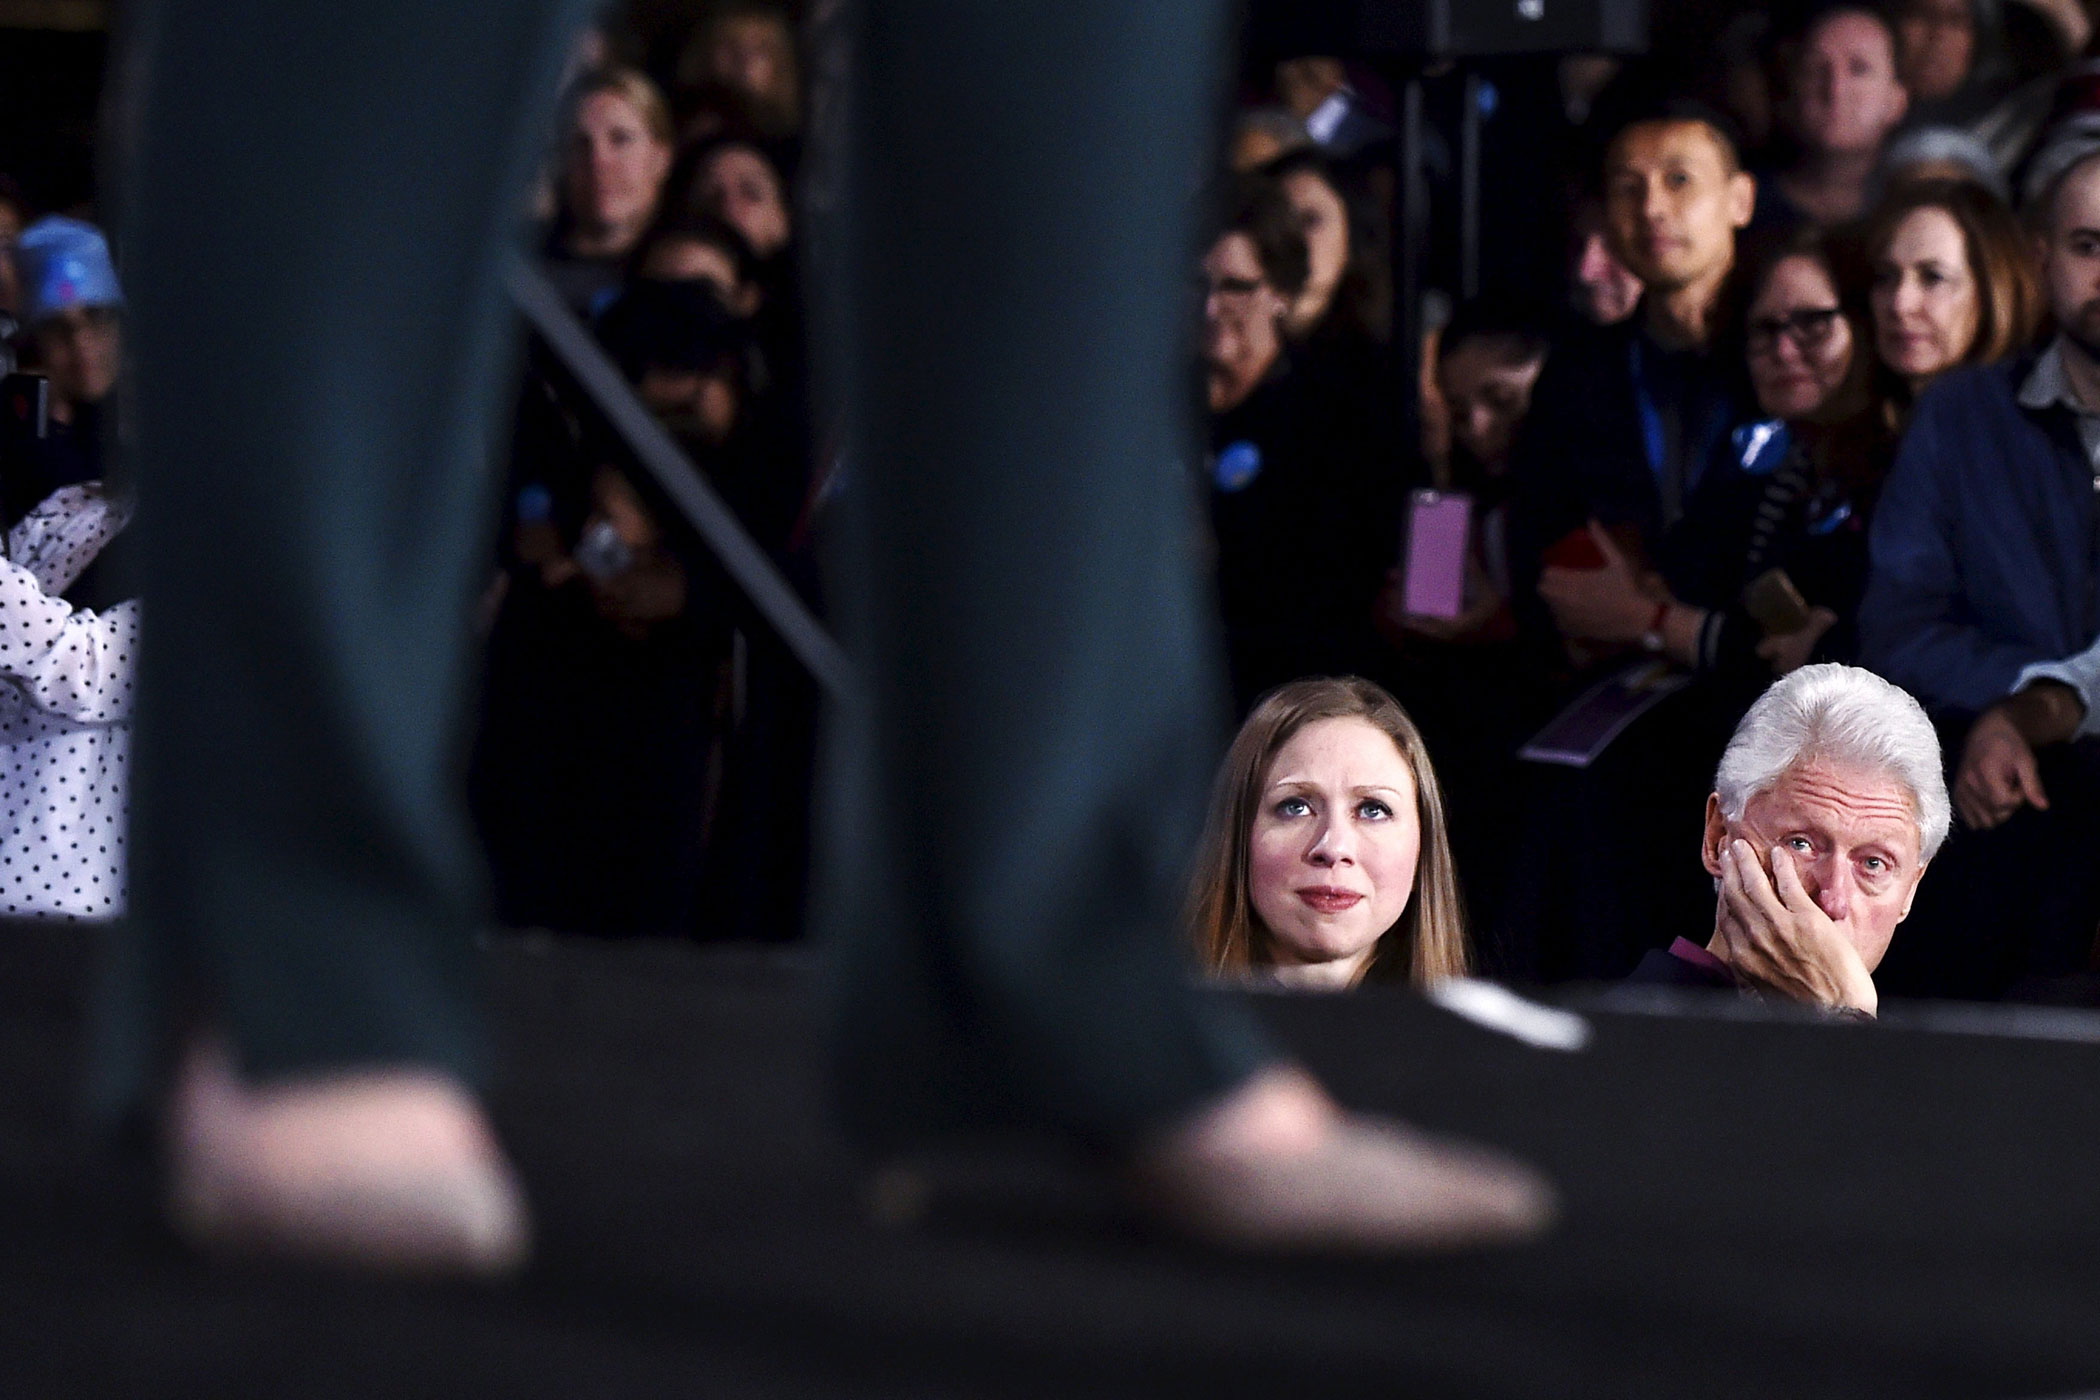 Chelsea and Bill Clinton, watch Hillary Clinton speak at a campaign rally at the Clark County Government Center in Las Vegas on Feb. 19, 2016.